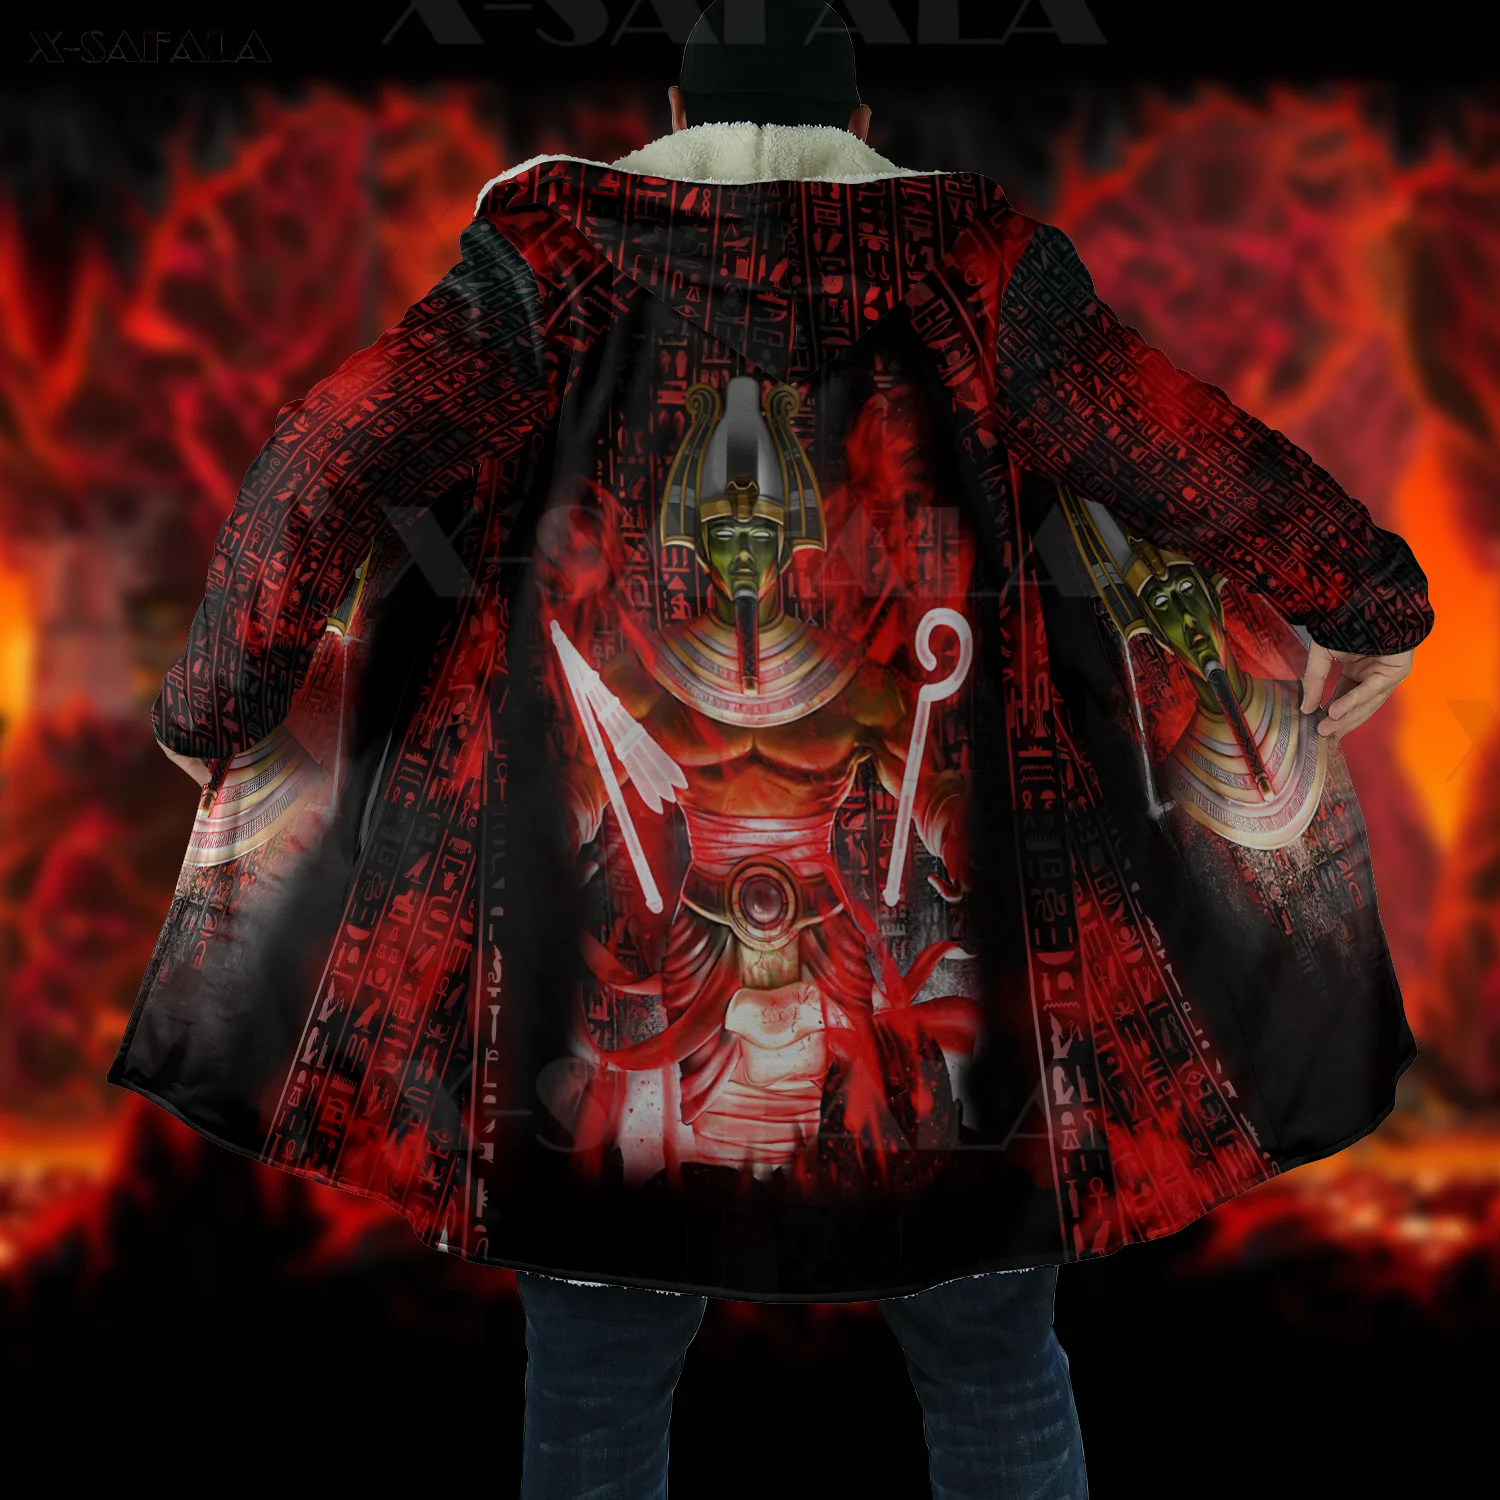 saw Moon rod The Gods Of Egypt Osiris Skull Viking 3D Printed Hoodie Coat Hooded Blanket  Cloak Thick Jacket Cotton Pullovers Dunnes Overcoat| | - AliExpress